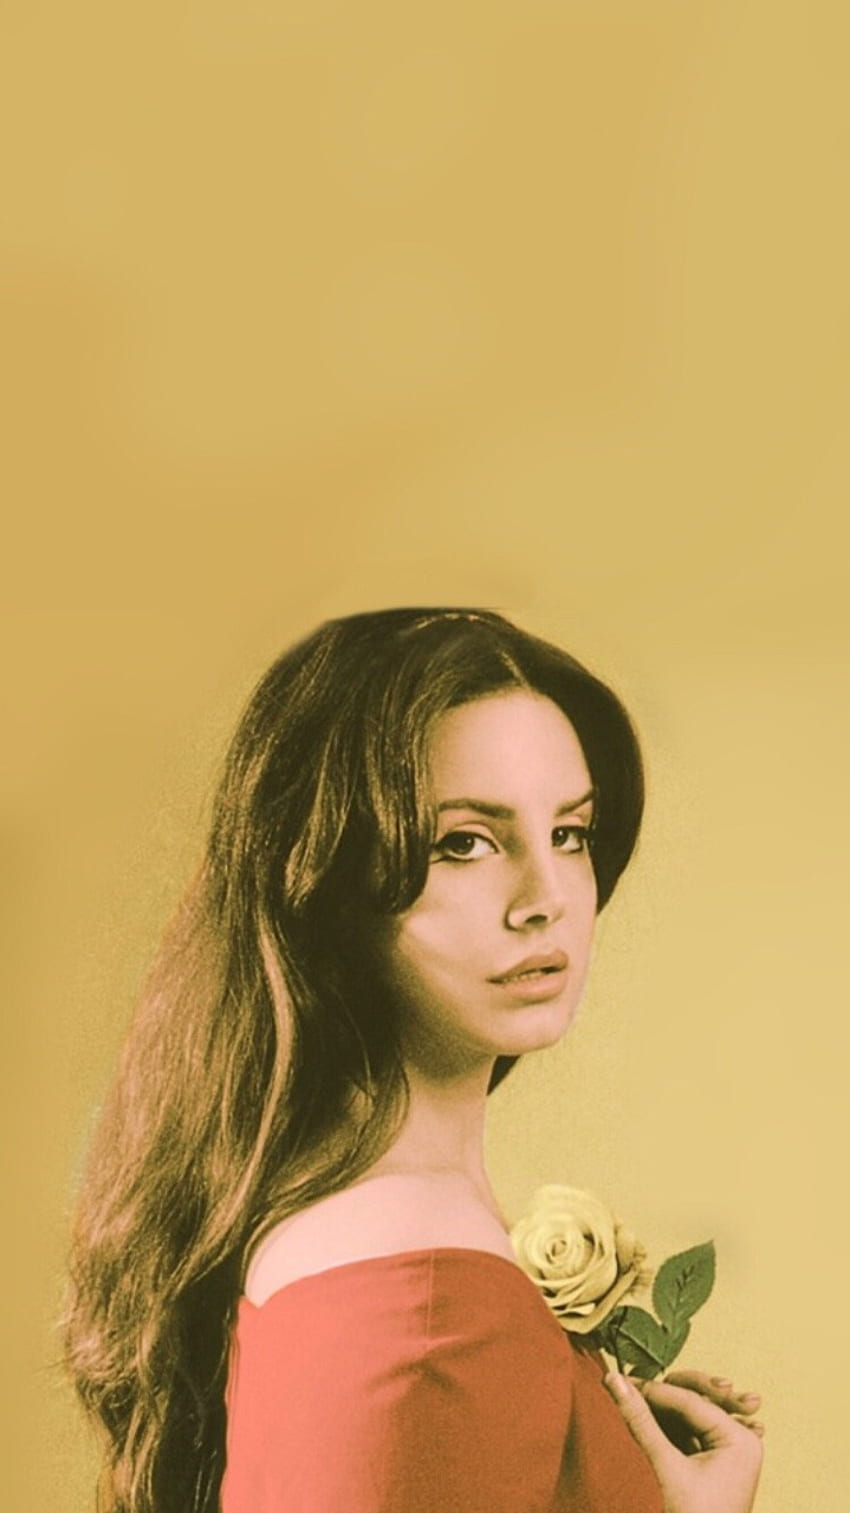 Lana Del Rey Video Games iPhone Wallpaper by belairparadise on DeviantArt